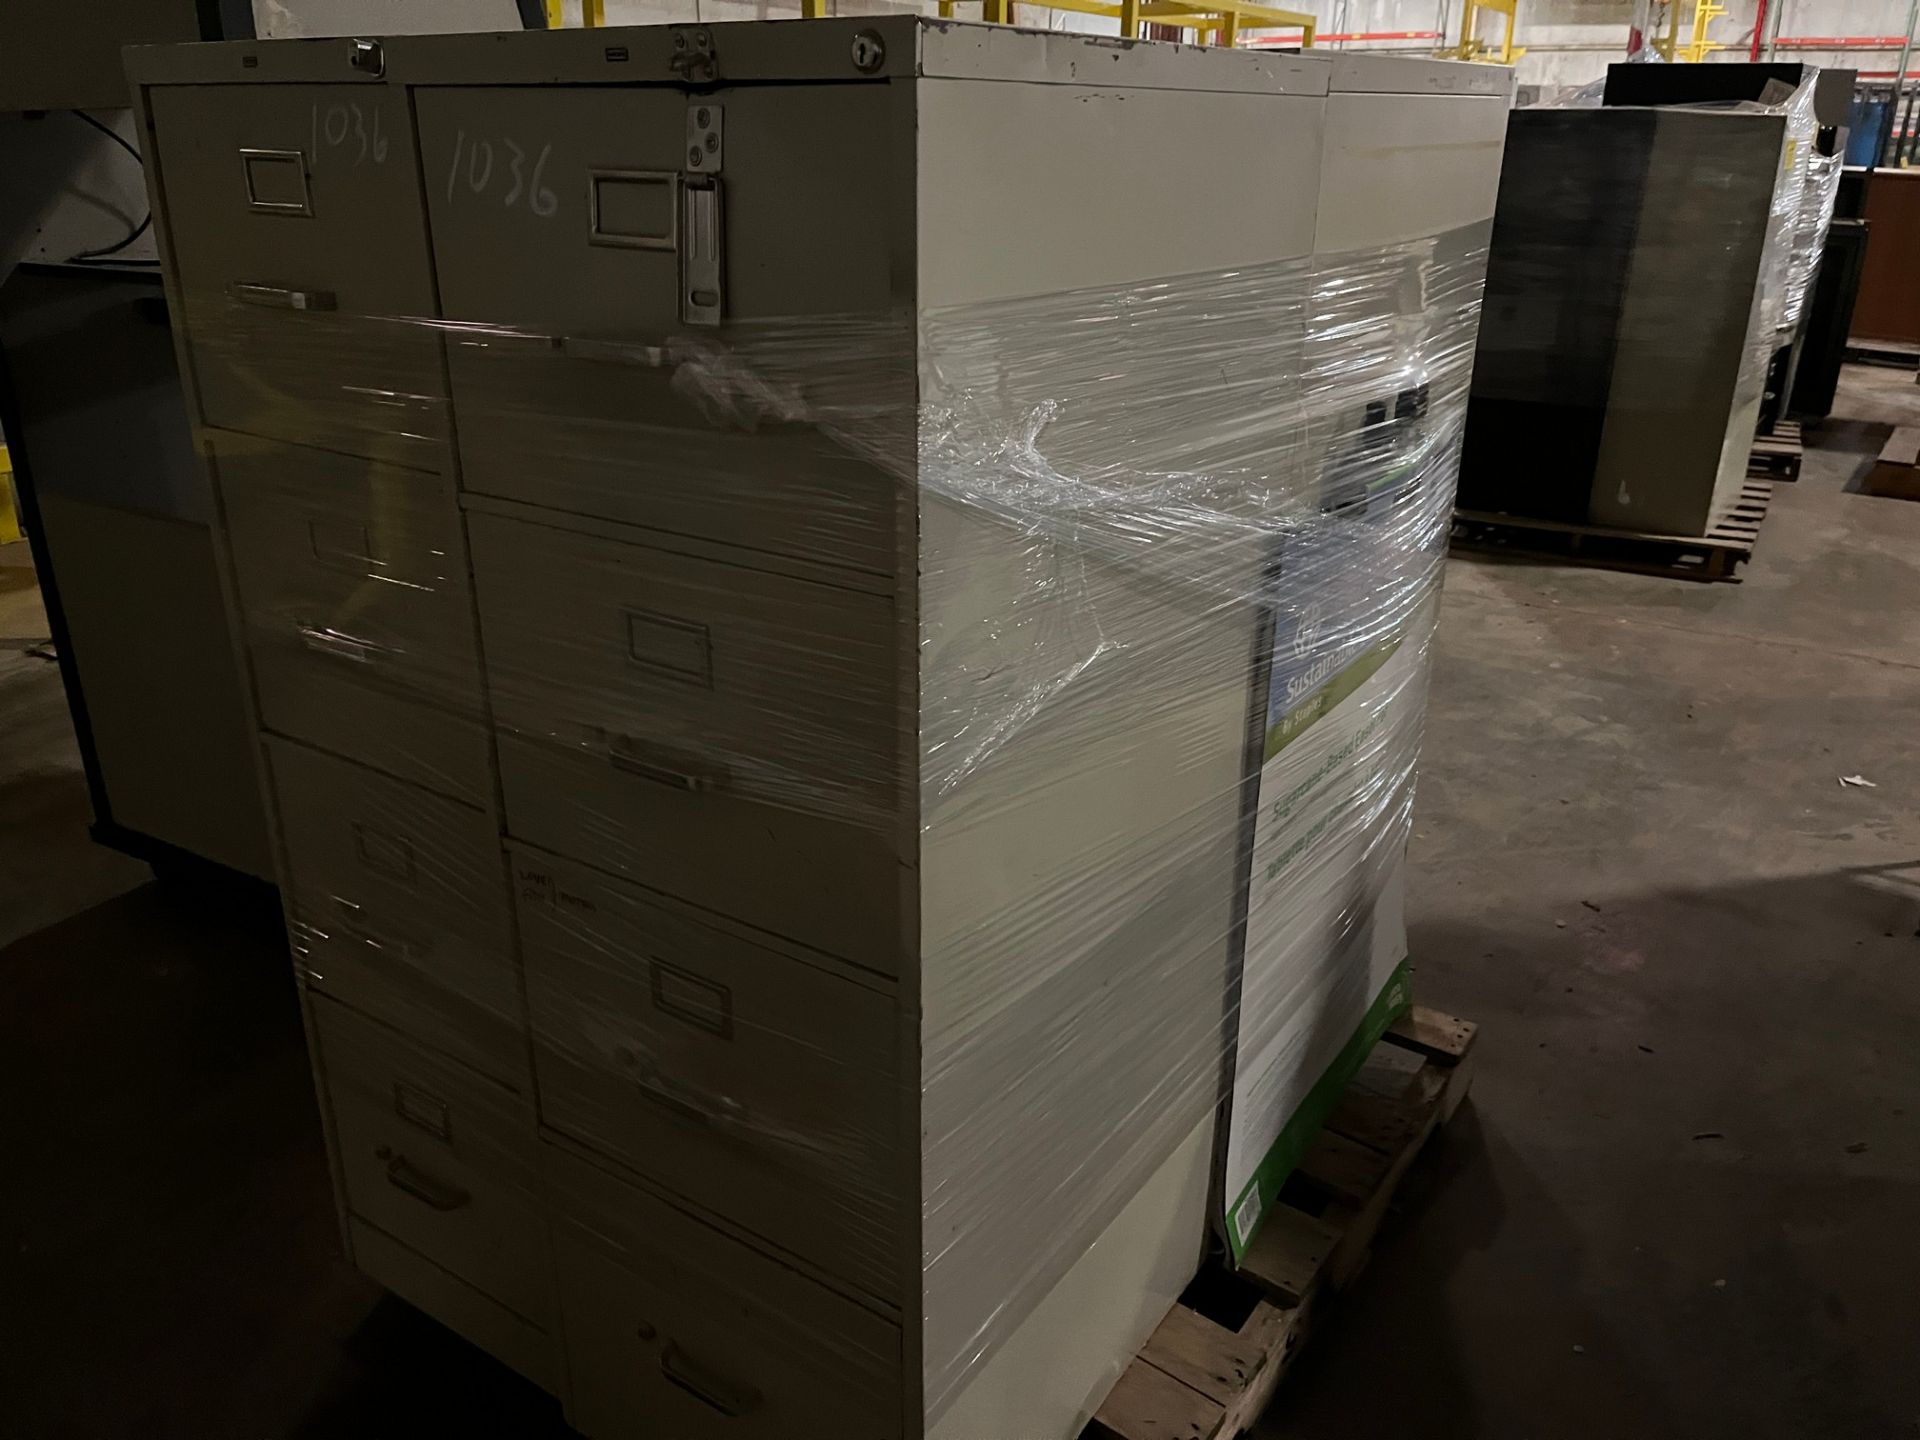 LOT OF (4) FILE CABINETS SHRINK WRAPPED ON PALLET (PM WAREHOUSE) - Image 2 of 2